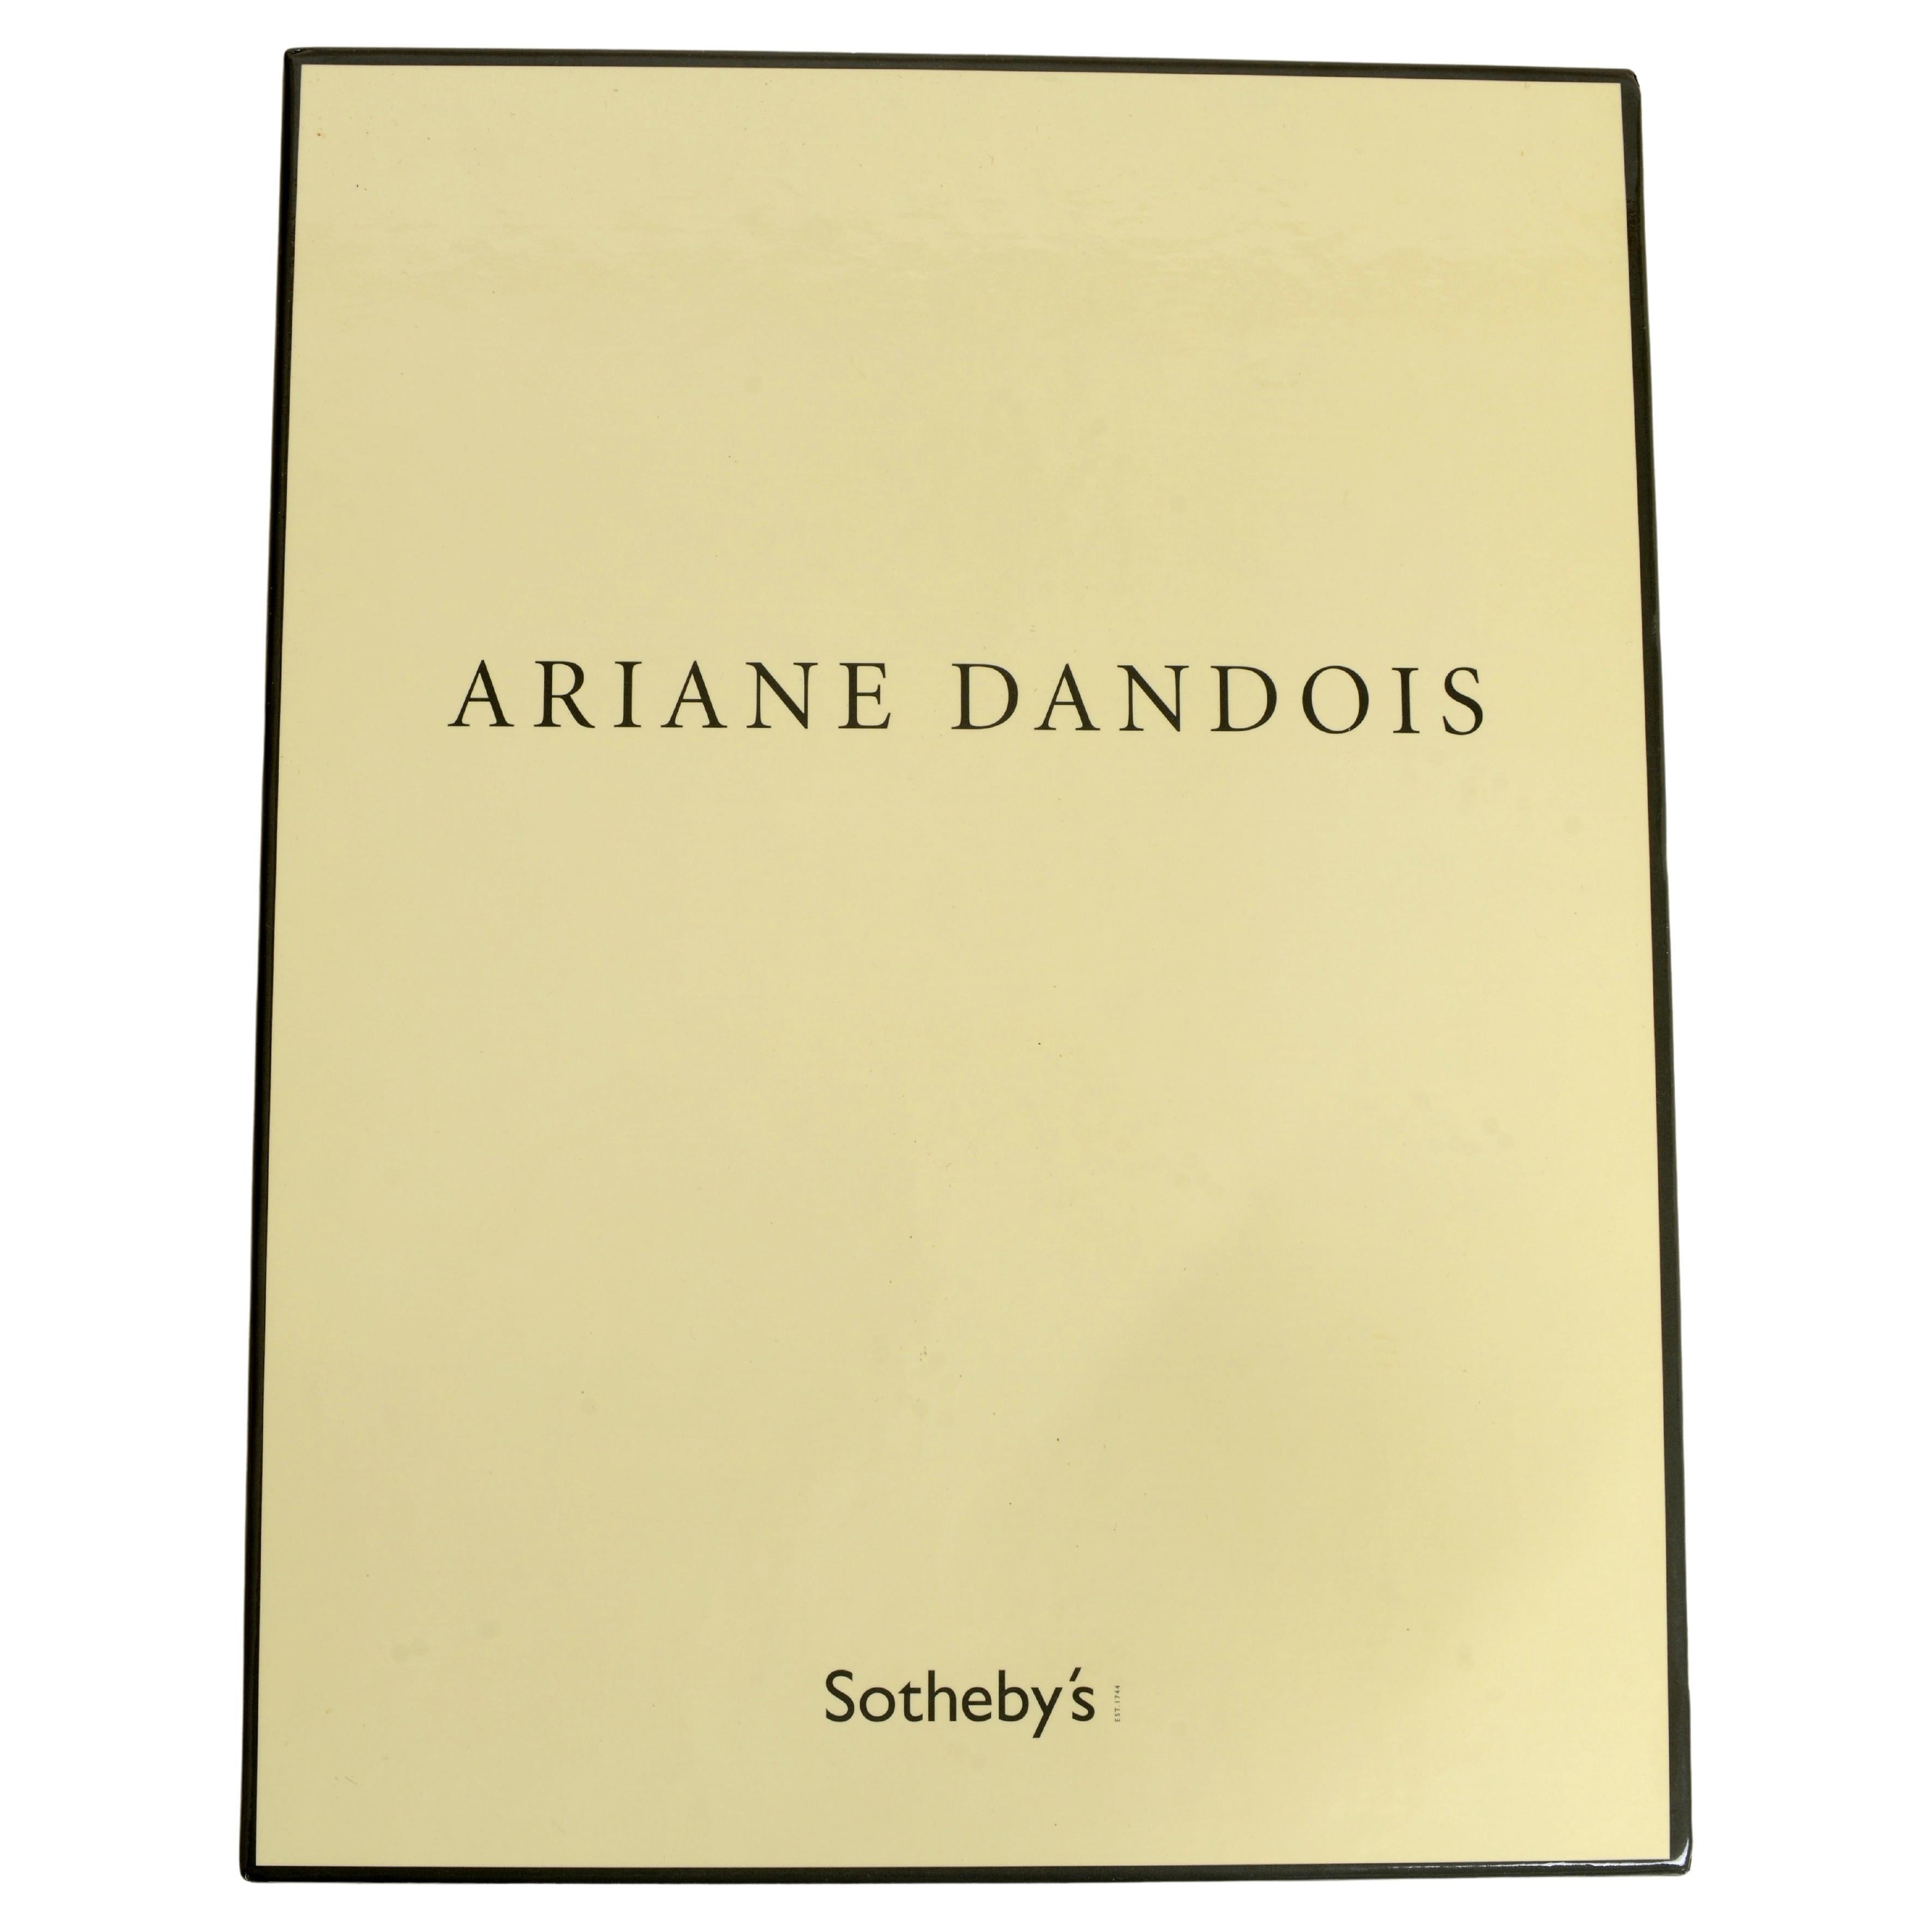 Sotheby's Ariane Dandois, October 2007, Volumes I and II, 1st Ed